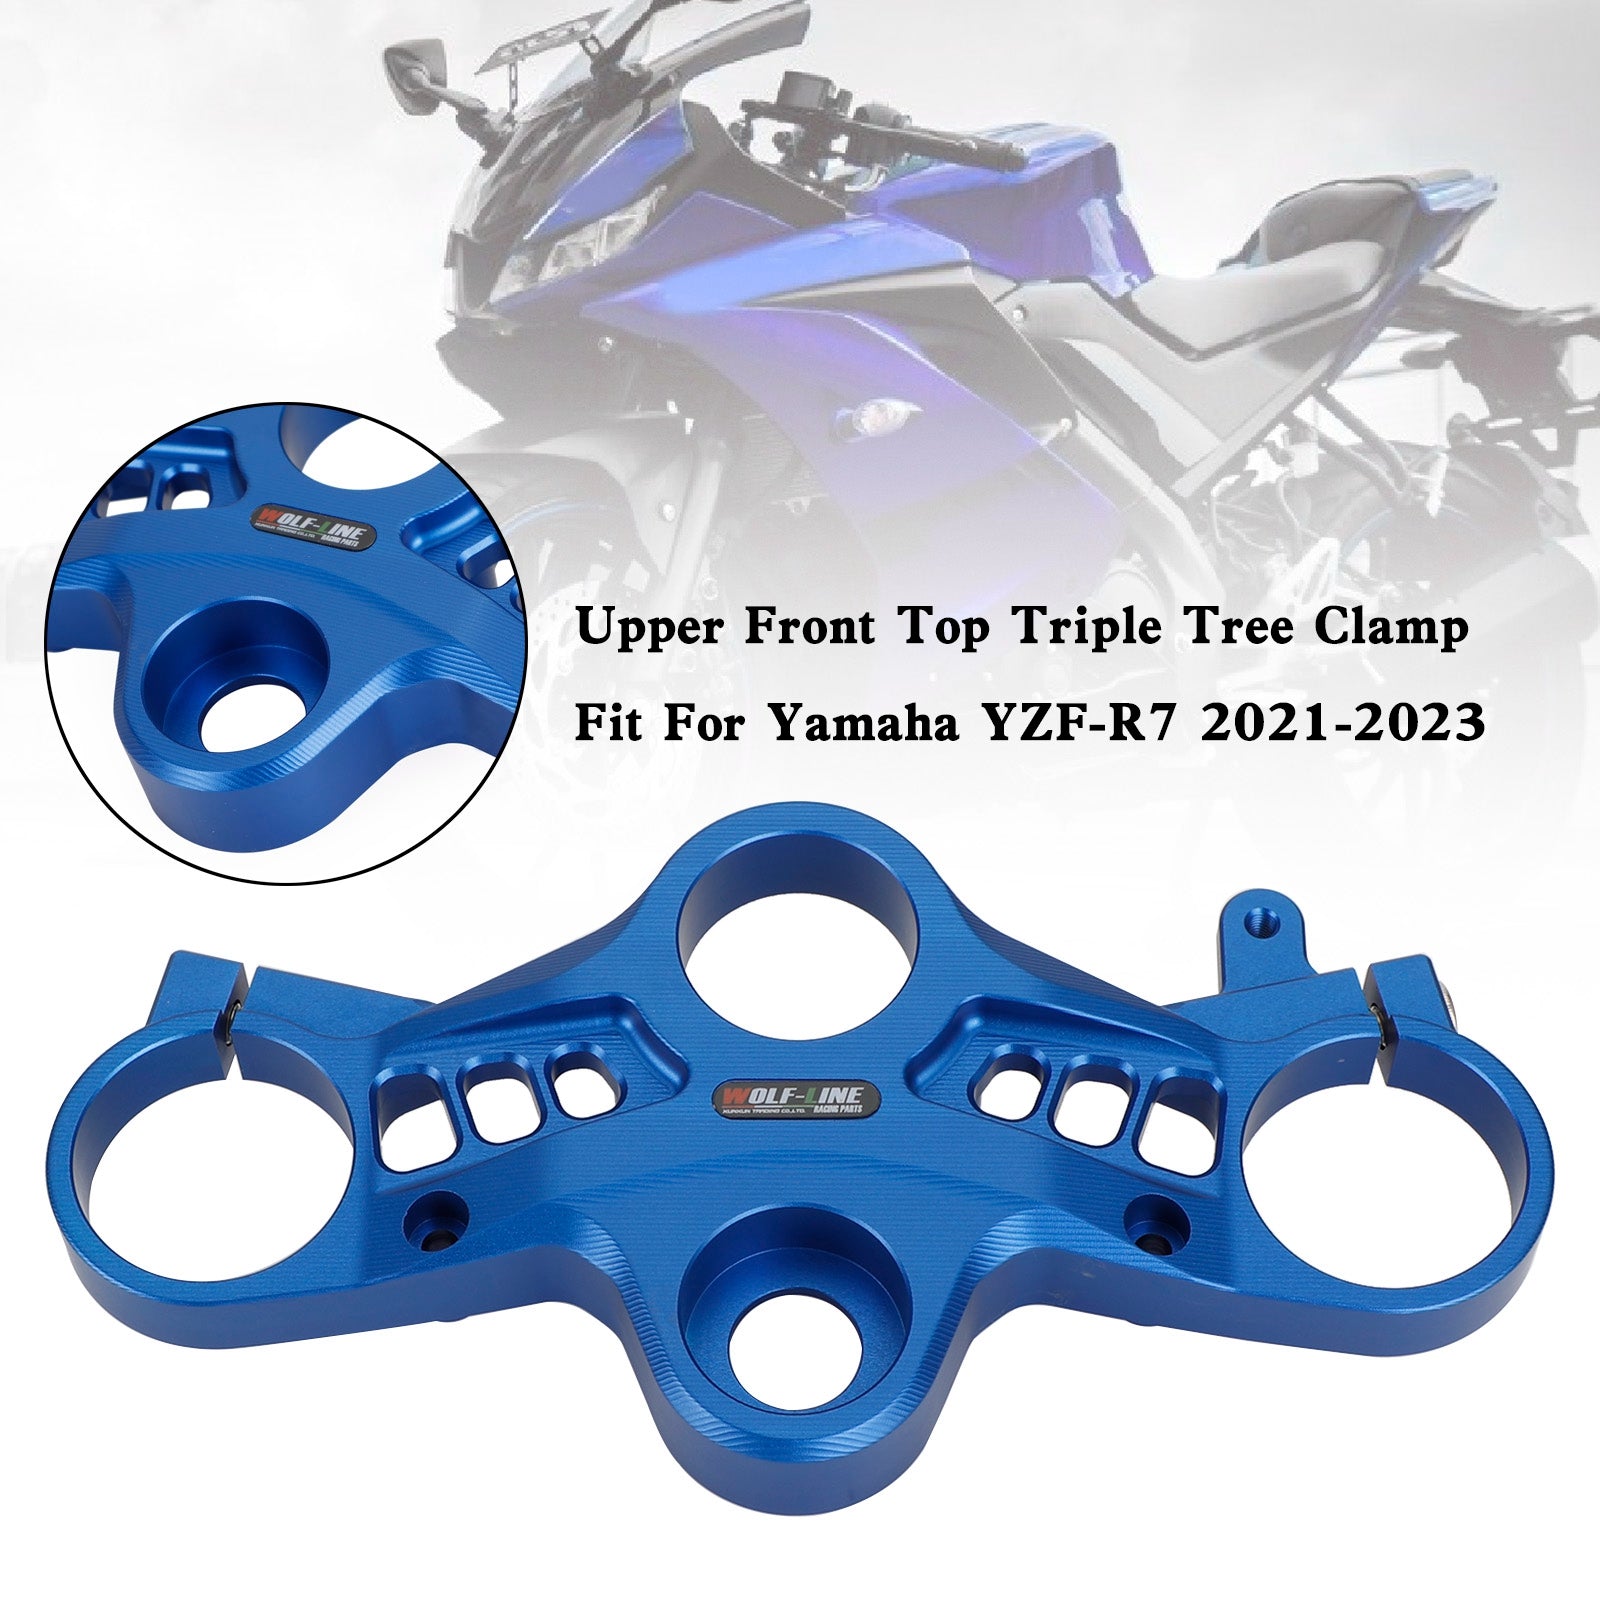 Aluminum Upper Front Top Triple Tree Clamp For Yamaha YZF-R7 2021-2023